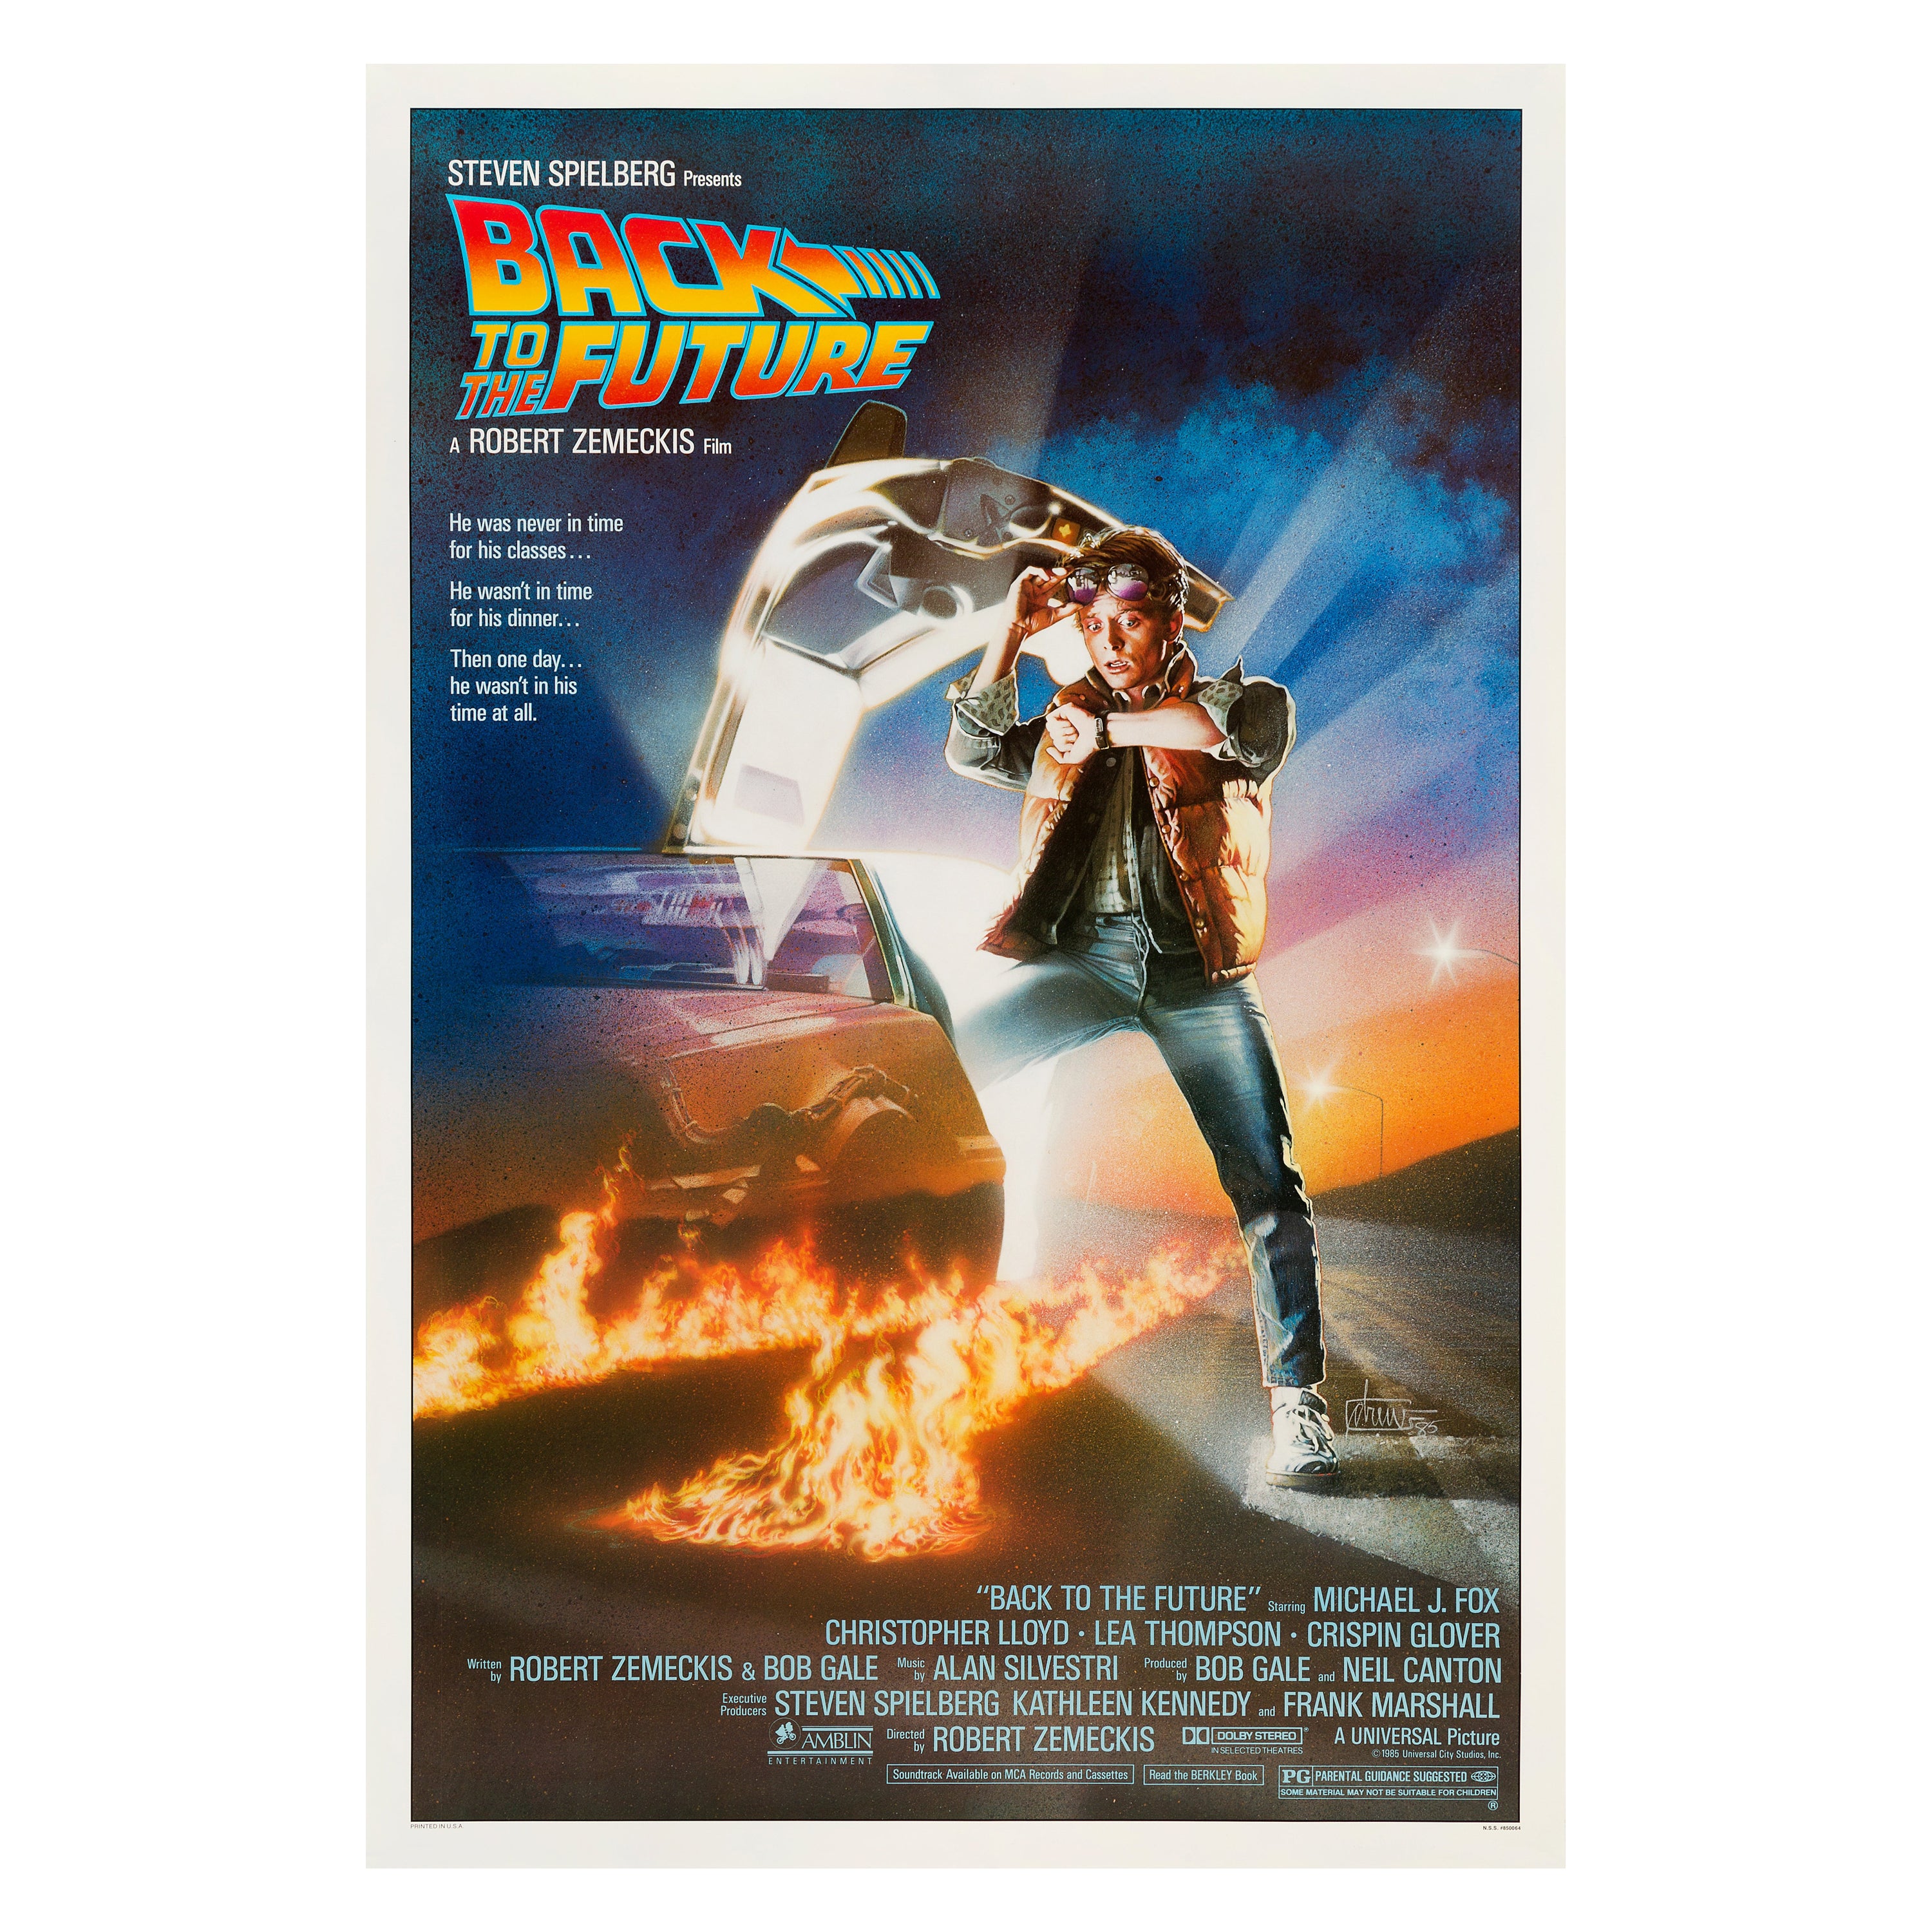 'Back to the Future' Original US One Sheet Movie Poster by Drew Struzan, 1985